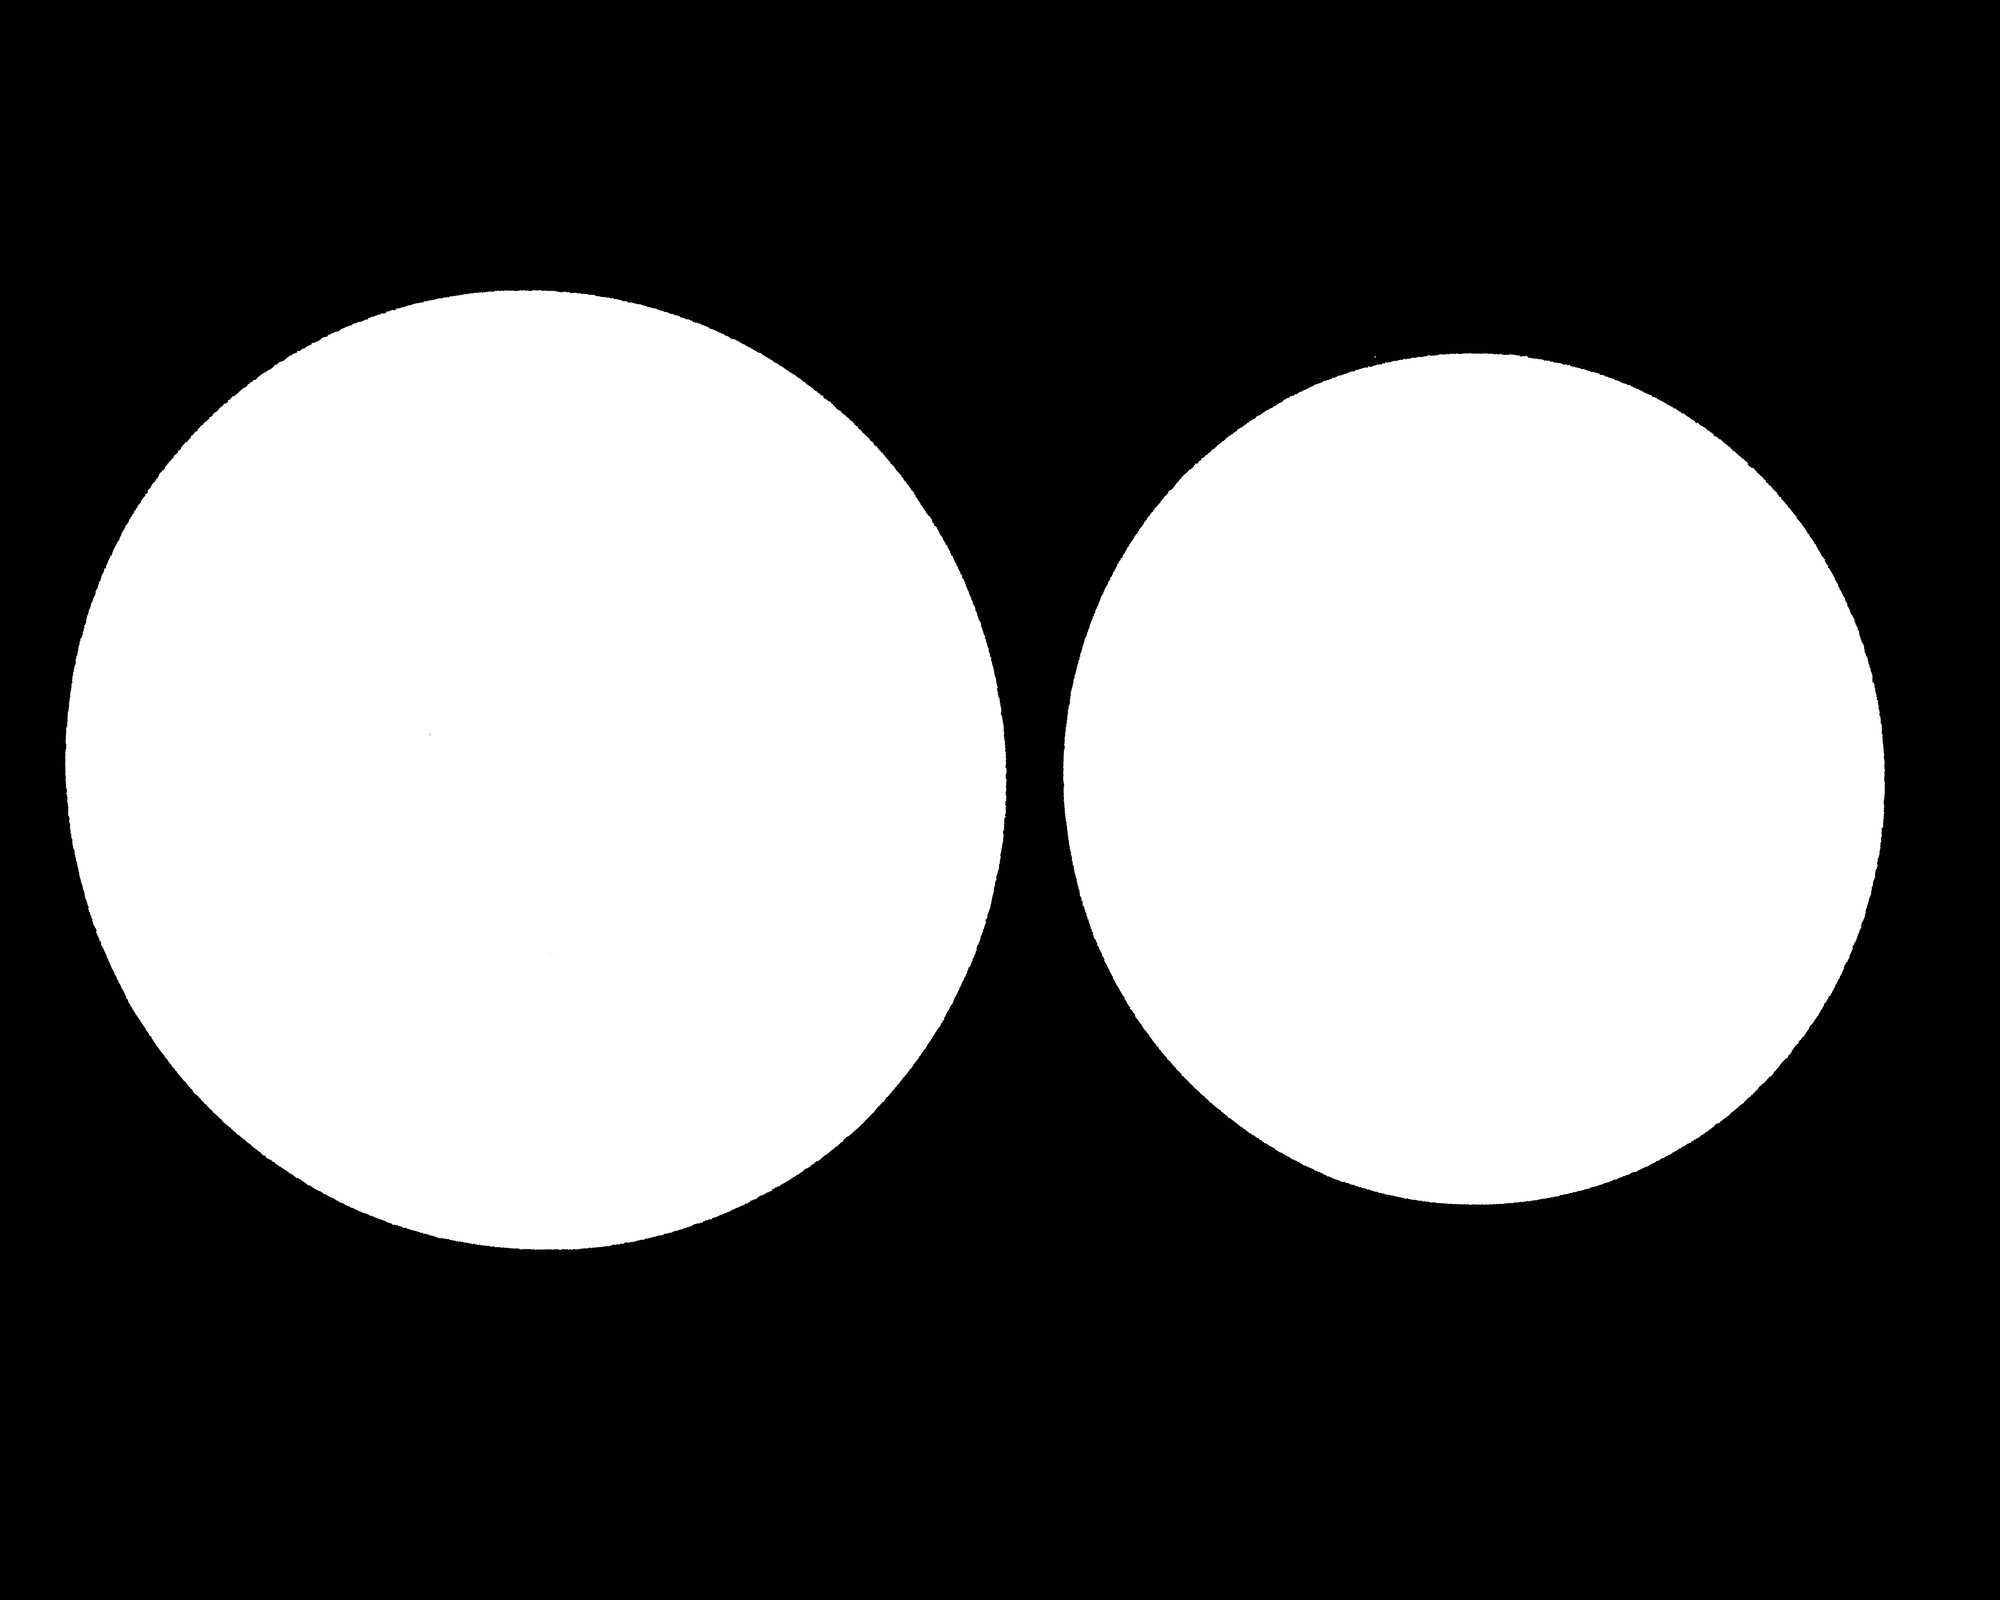 Two moons side by side